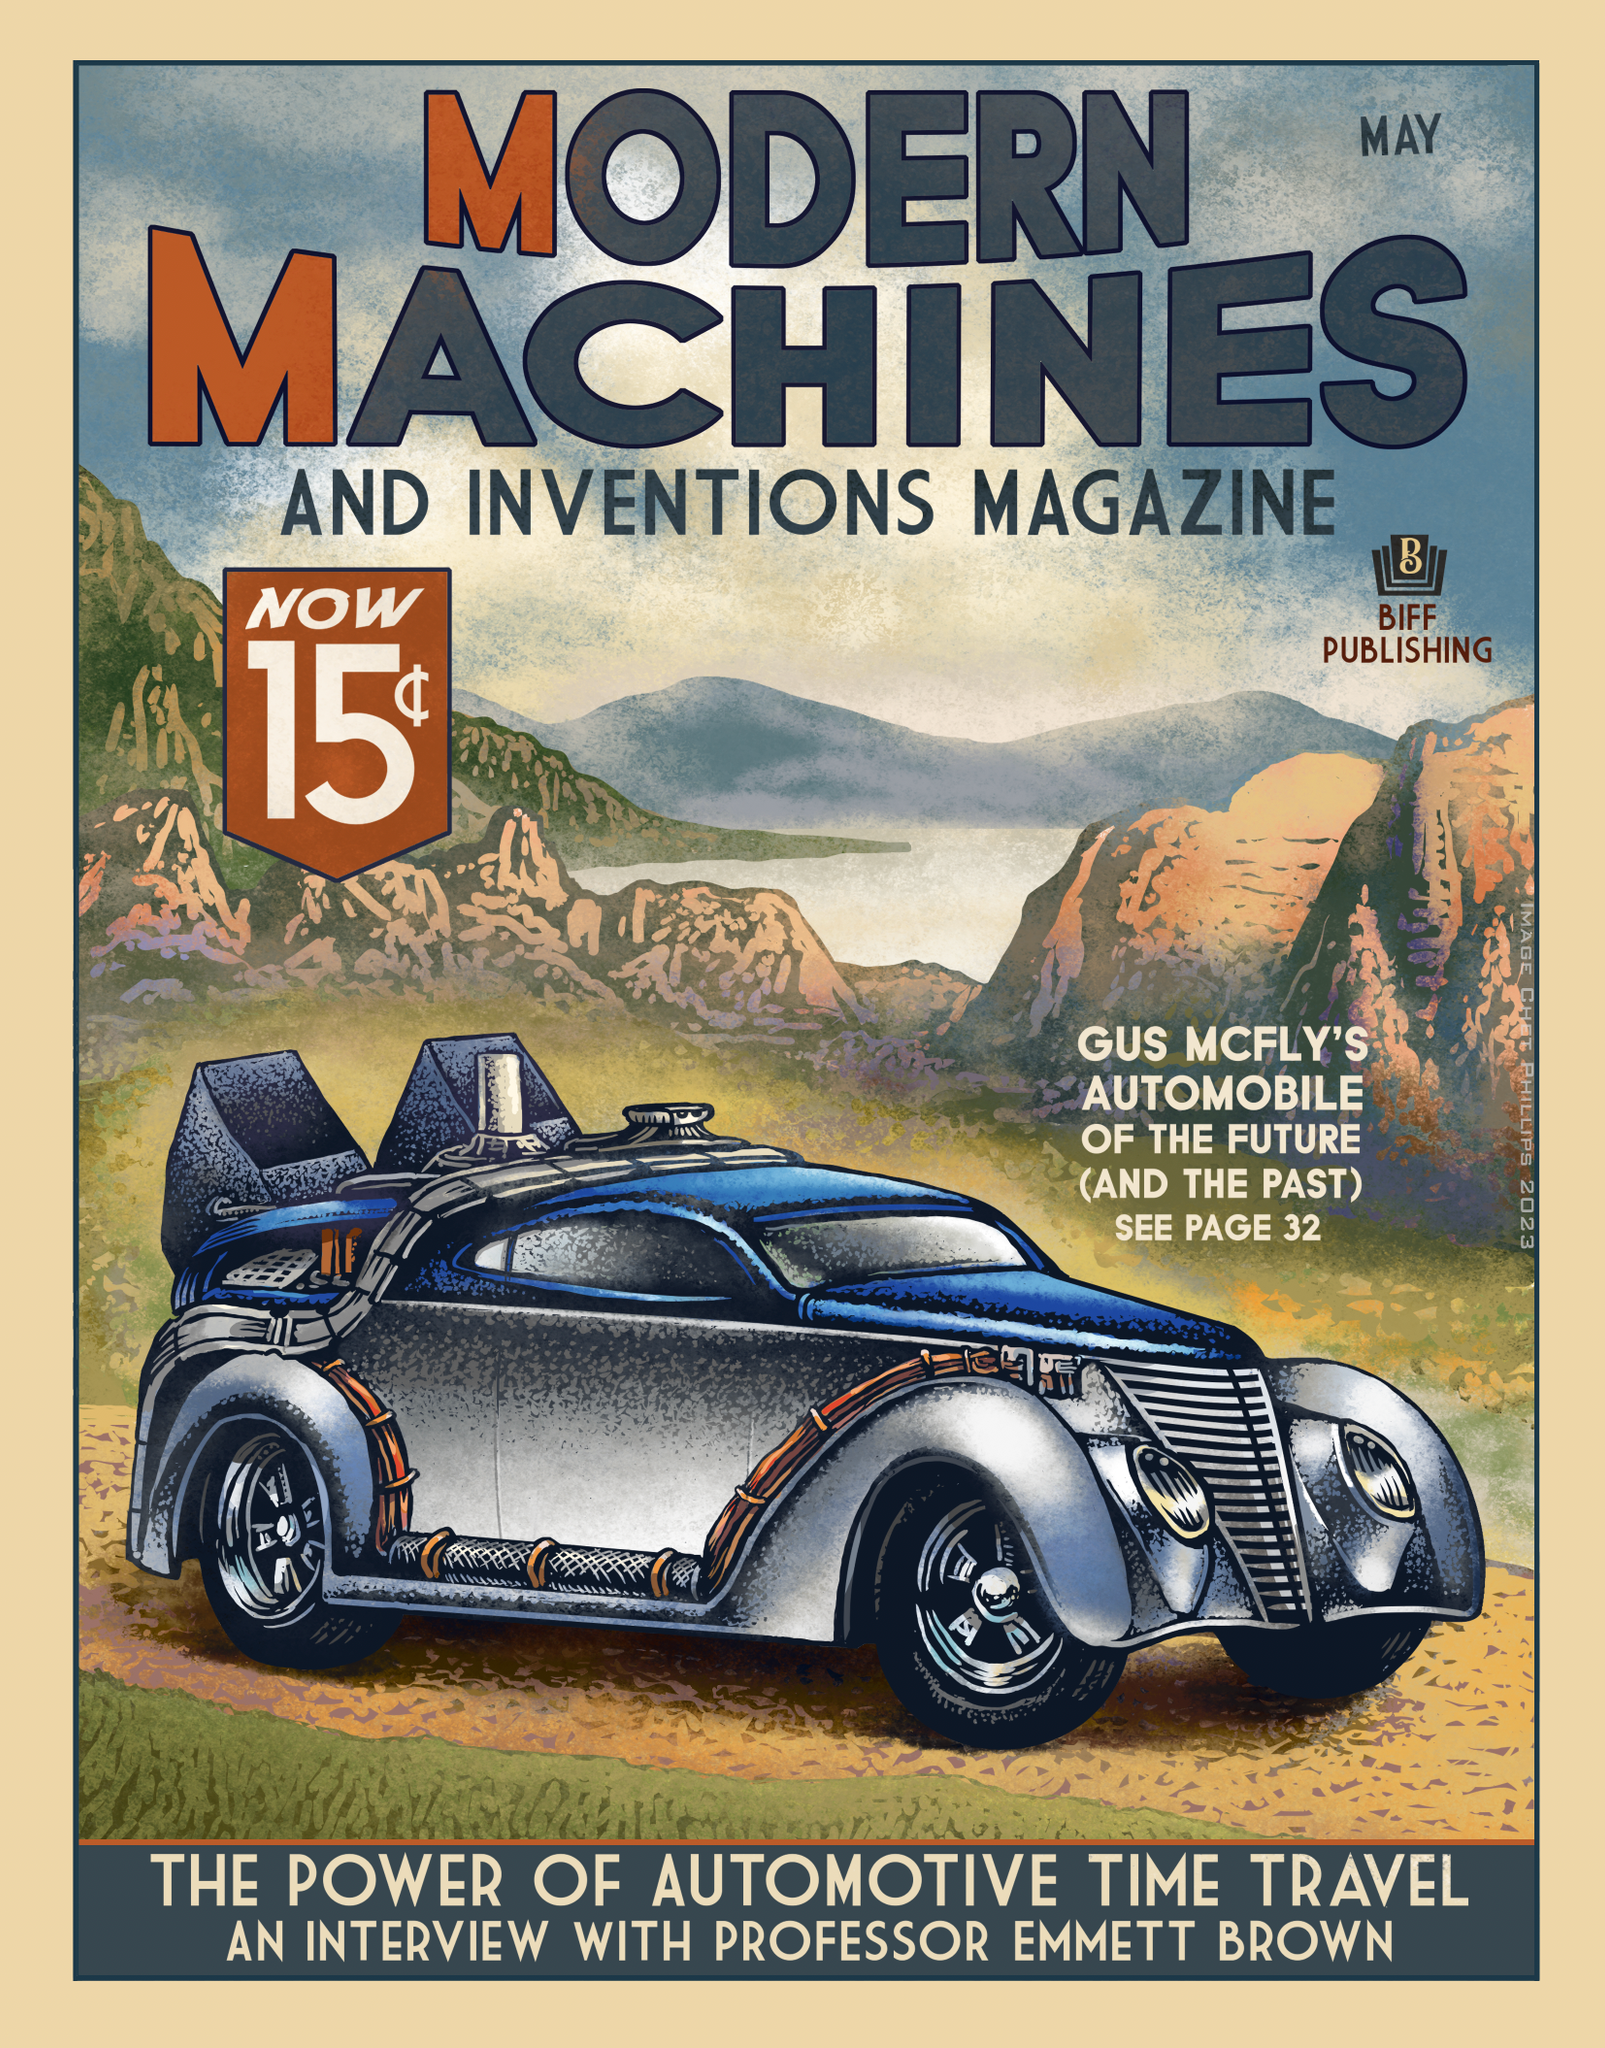 Auto Time Travel- Modern Machines and Inventions 11 x 14 signed print